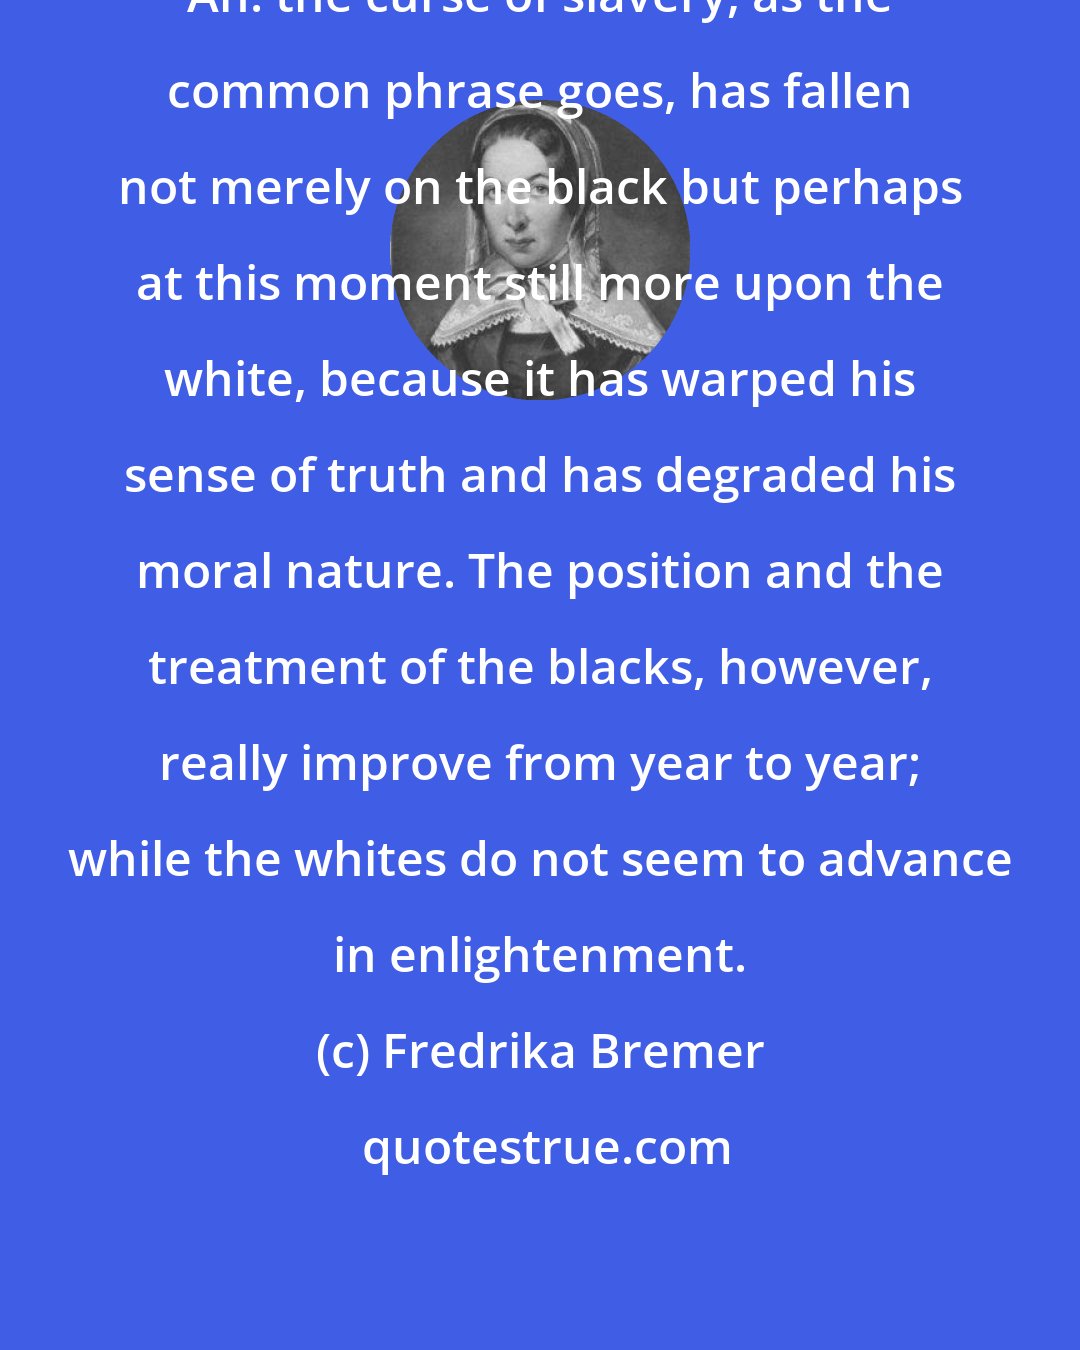 Fredrika Bremer: Ah! the curse of slavery, as the common phrase goes, has fallen not merely on the black but perhaps at this moment still more upon the white, because it has warped his sense of truth and has degraded his moral nature. The position and the treatment of the blacks, however, really improve from year to year; while the whites do not seem to advance in enlightenment.